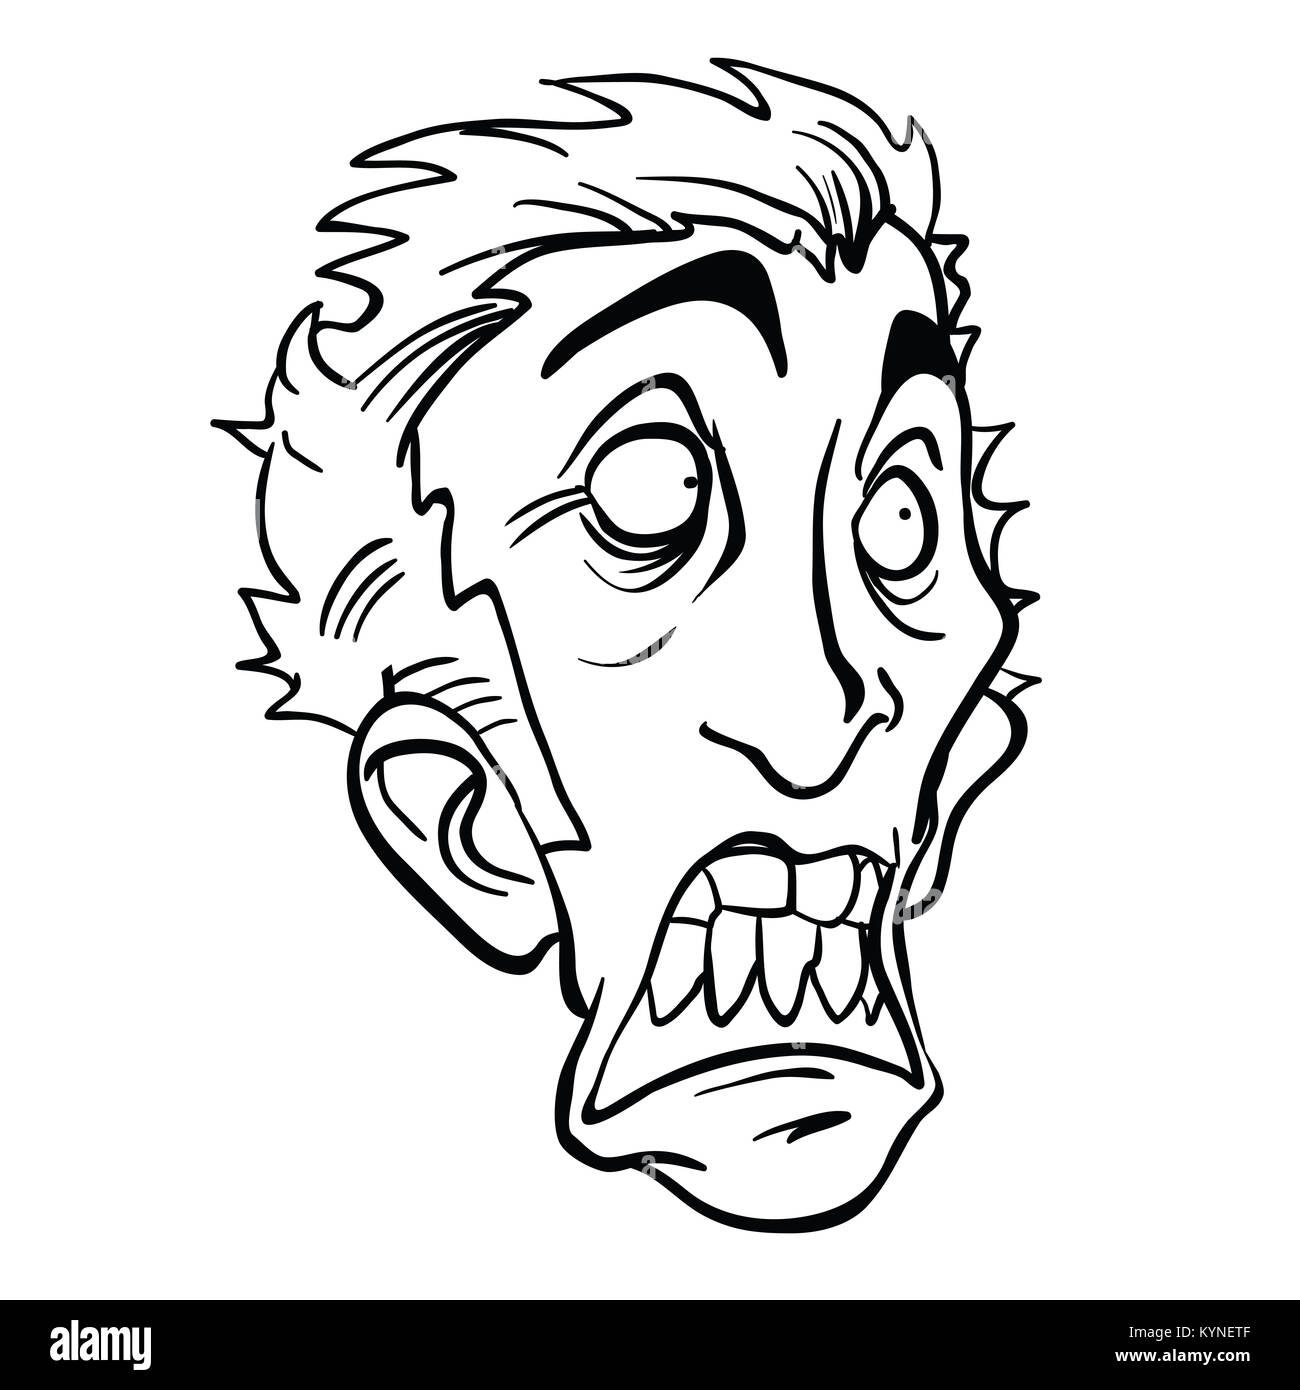 Free: Scared Cartoon People - Scared Face Clip Art Black And White